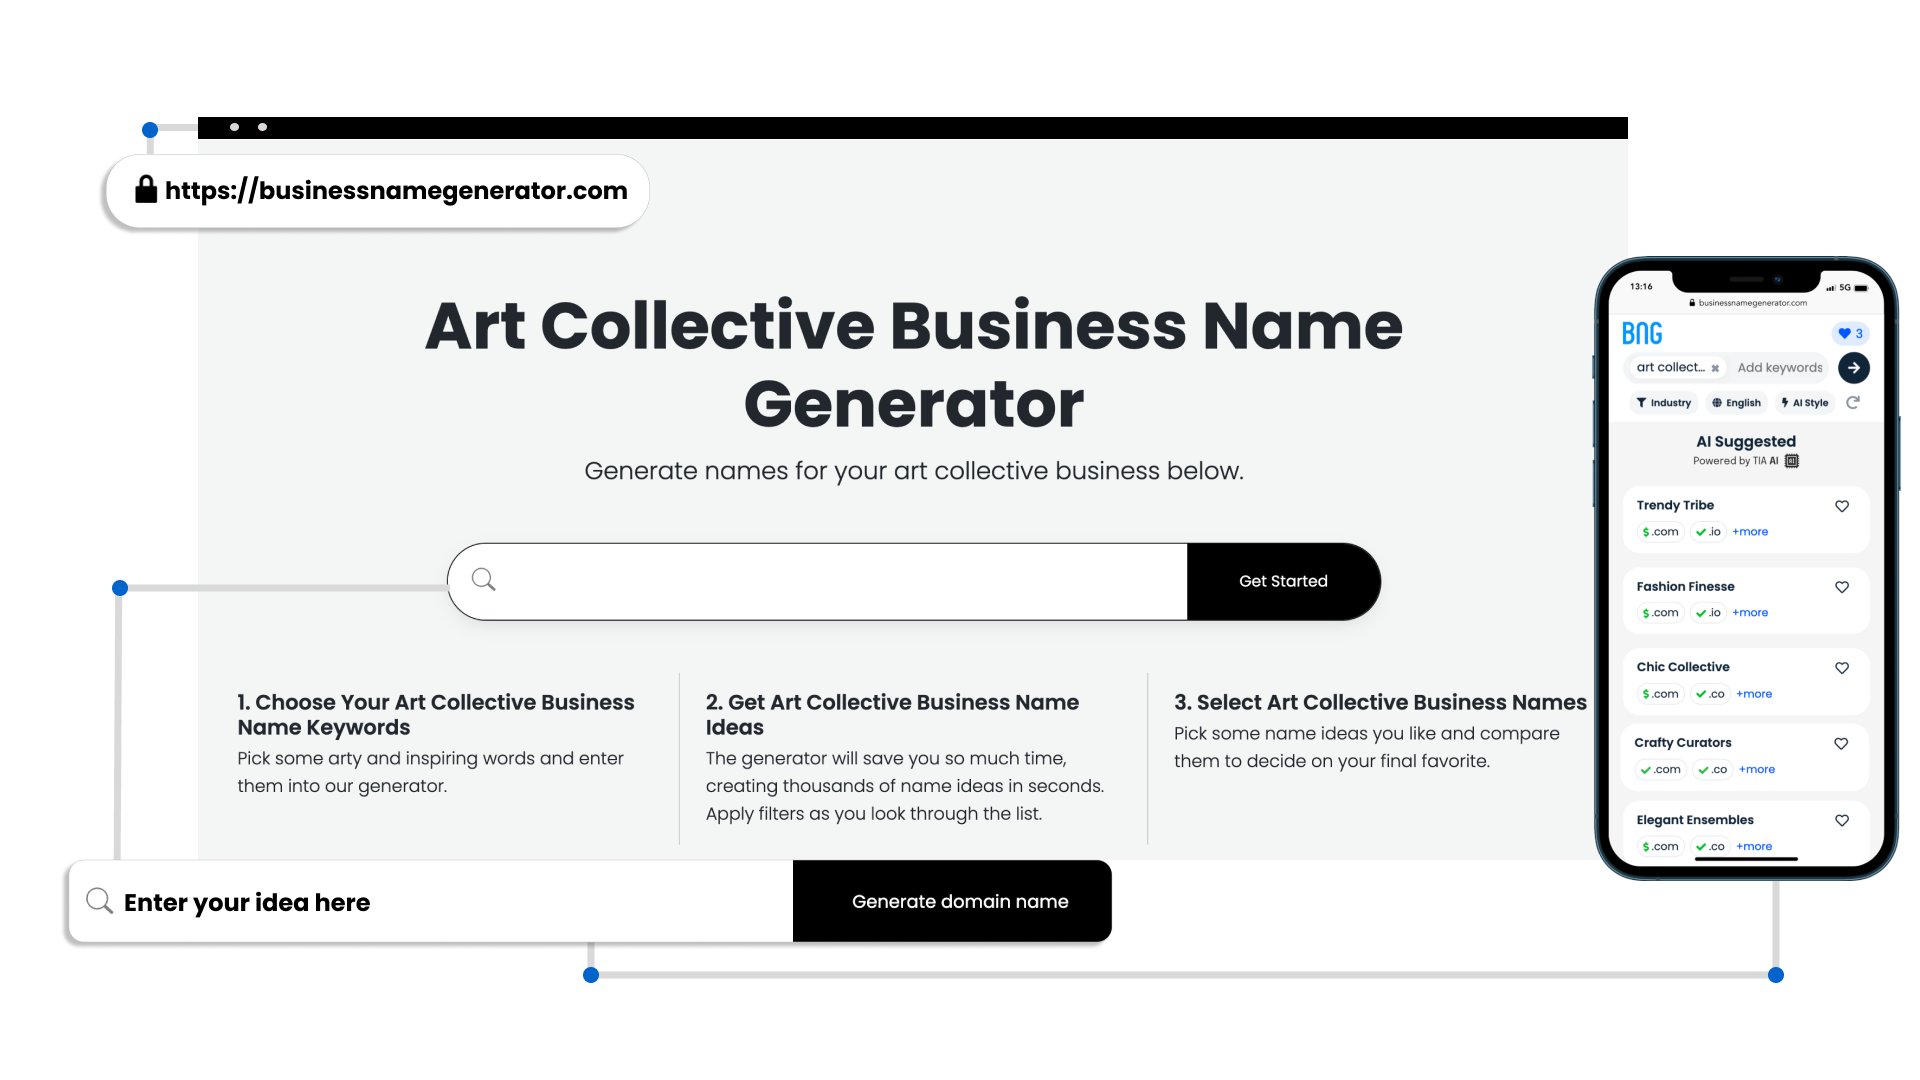 Art Collective Business Name Generator Functionality